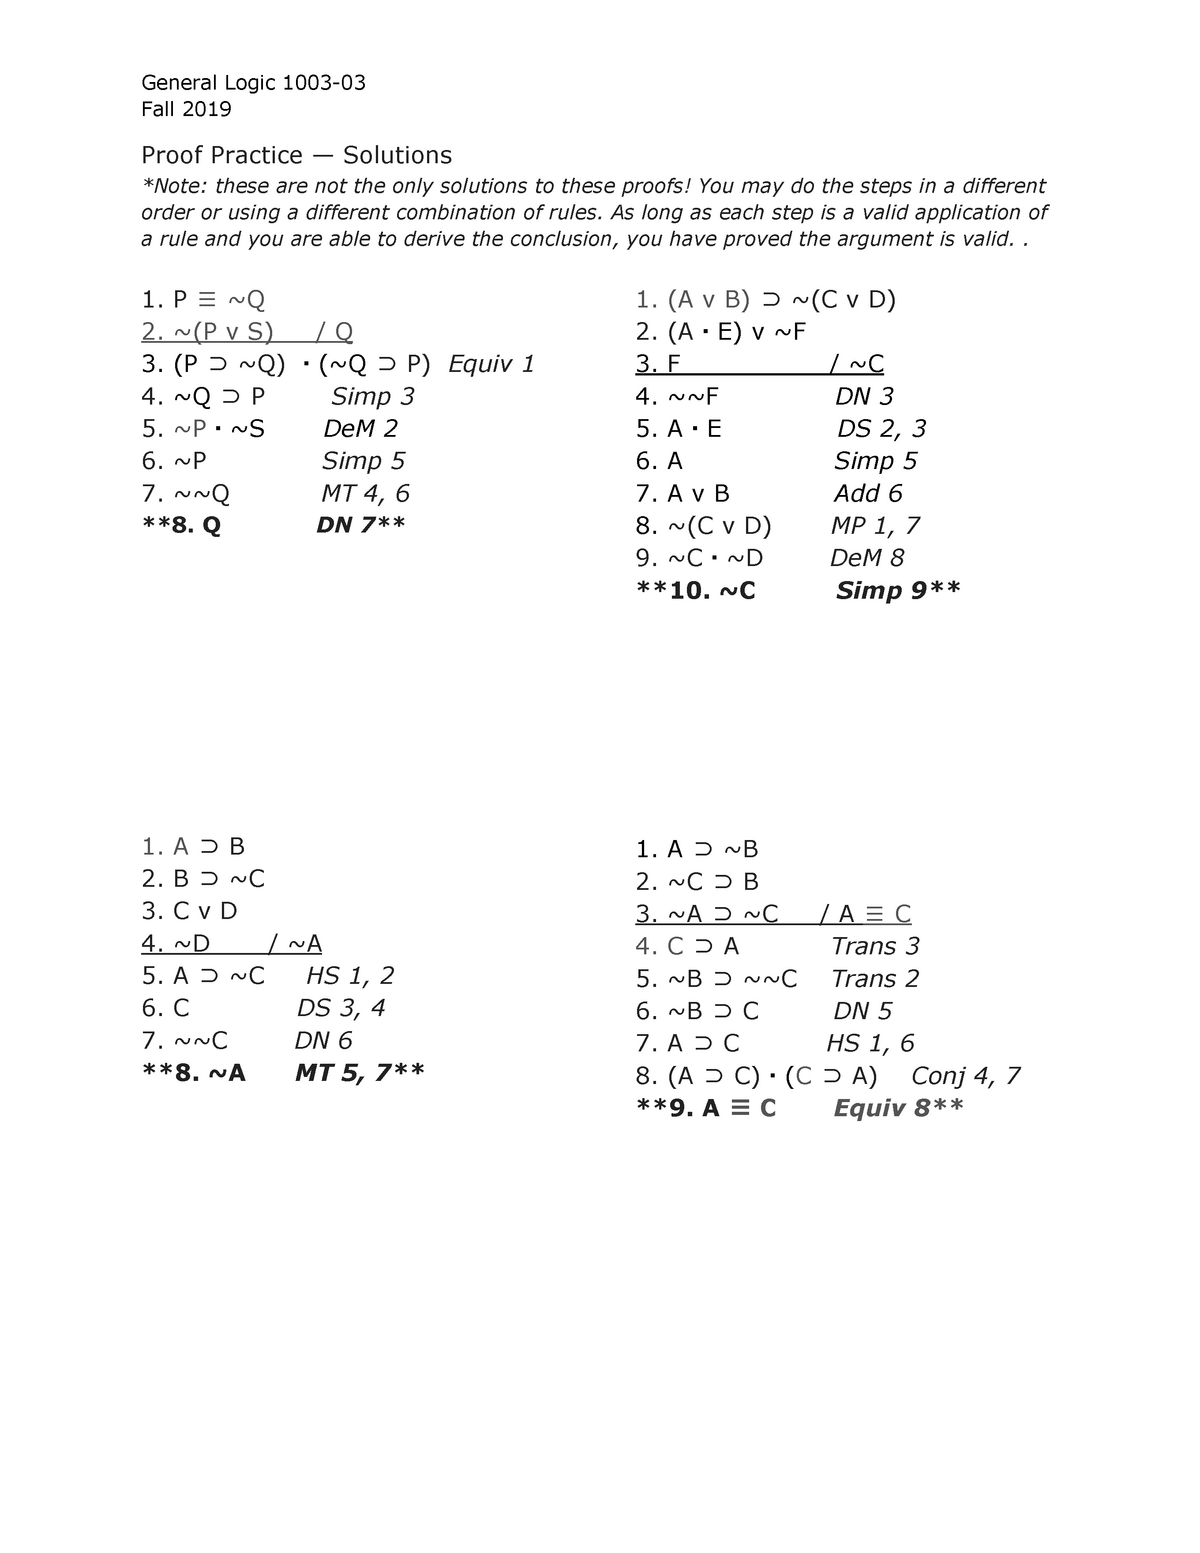 propositional-logic-proofs-practice-general-logic-1003-fall-2019-proof-practice-solutions